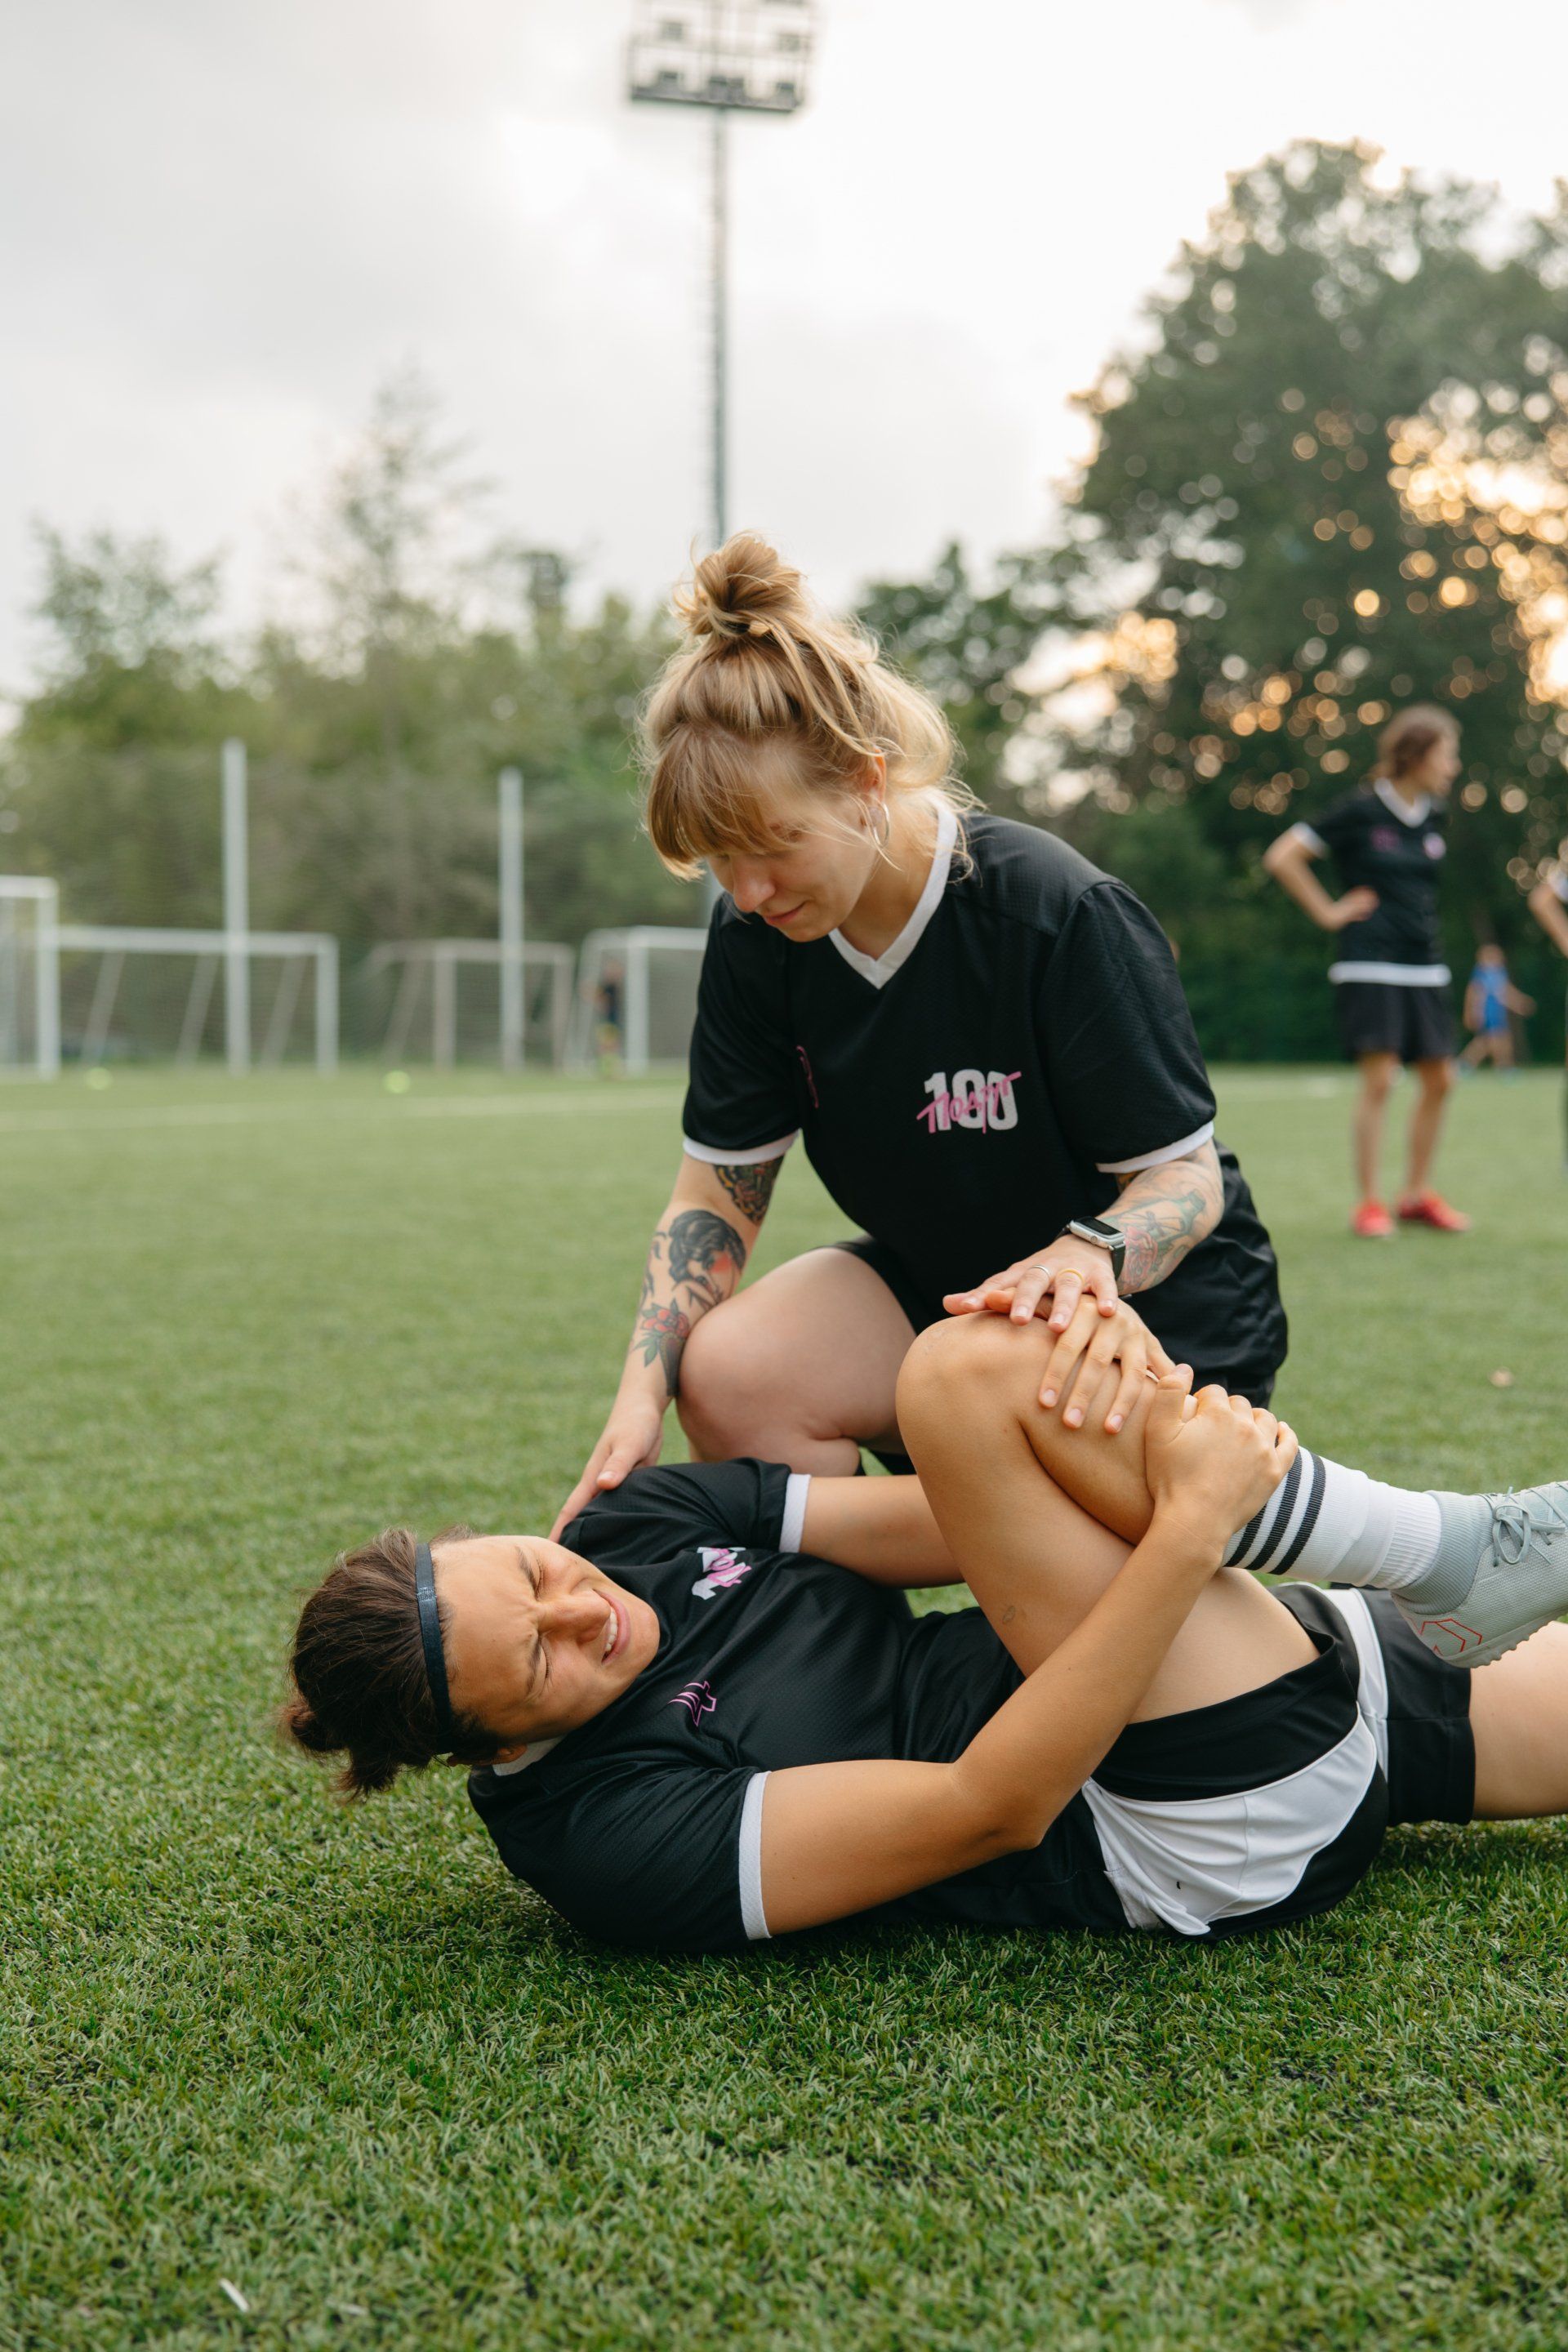 Female soccer player helping injured team player on 